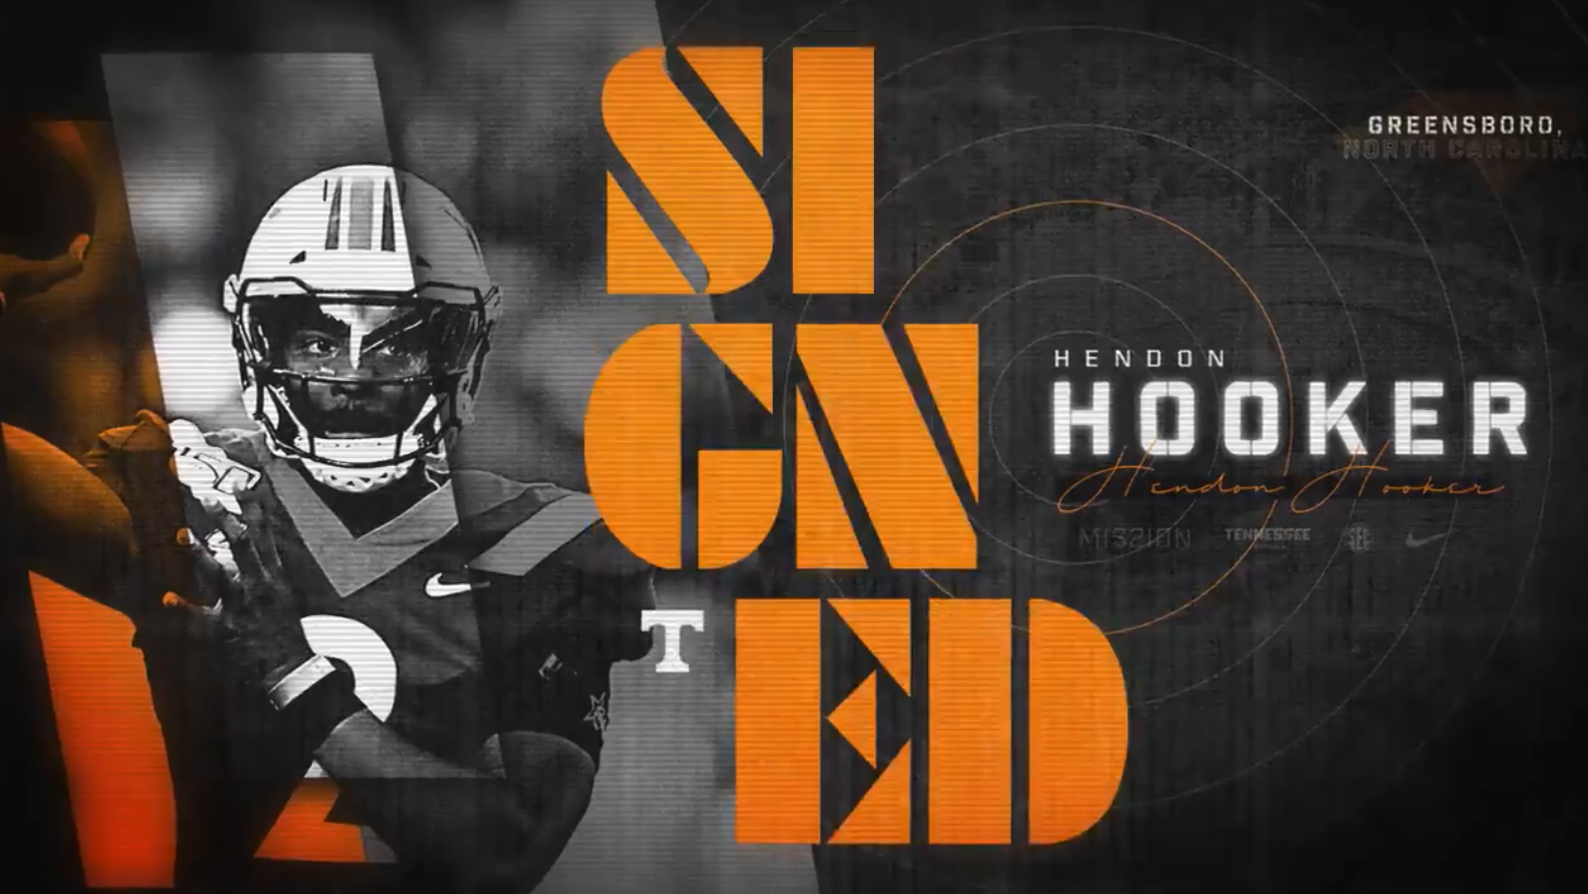 Tennessee announces transfer QB Hendon Hooker has signed with the program